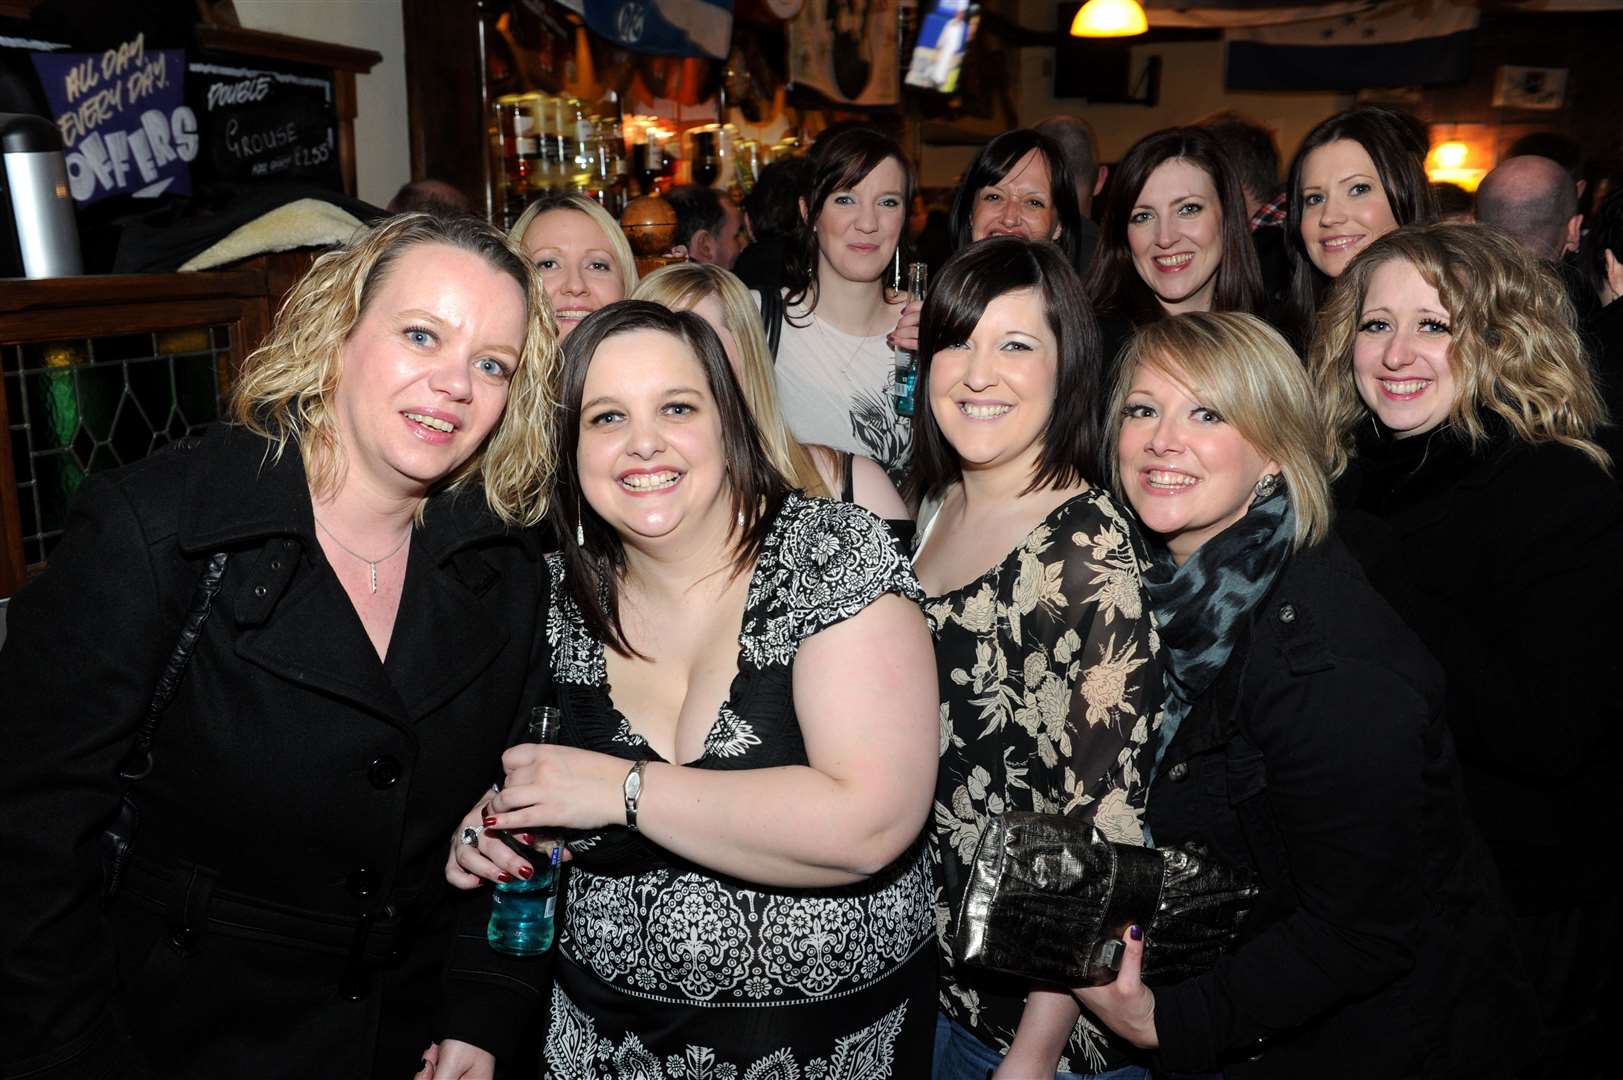 Michelle Fraser (centre) celebrates her 25th birthday with friends and family.